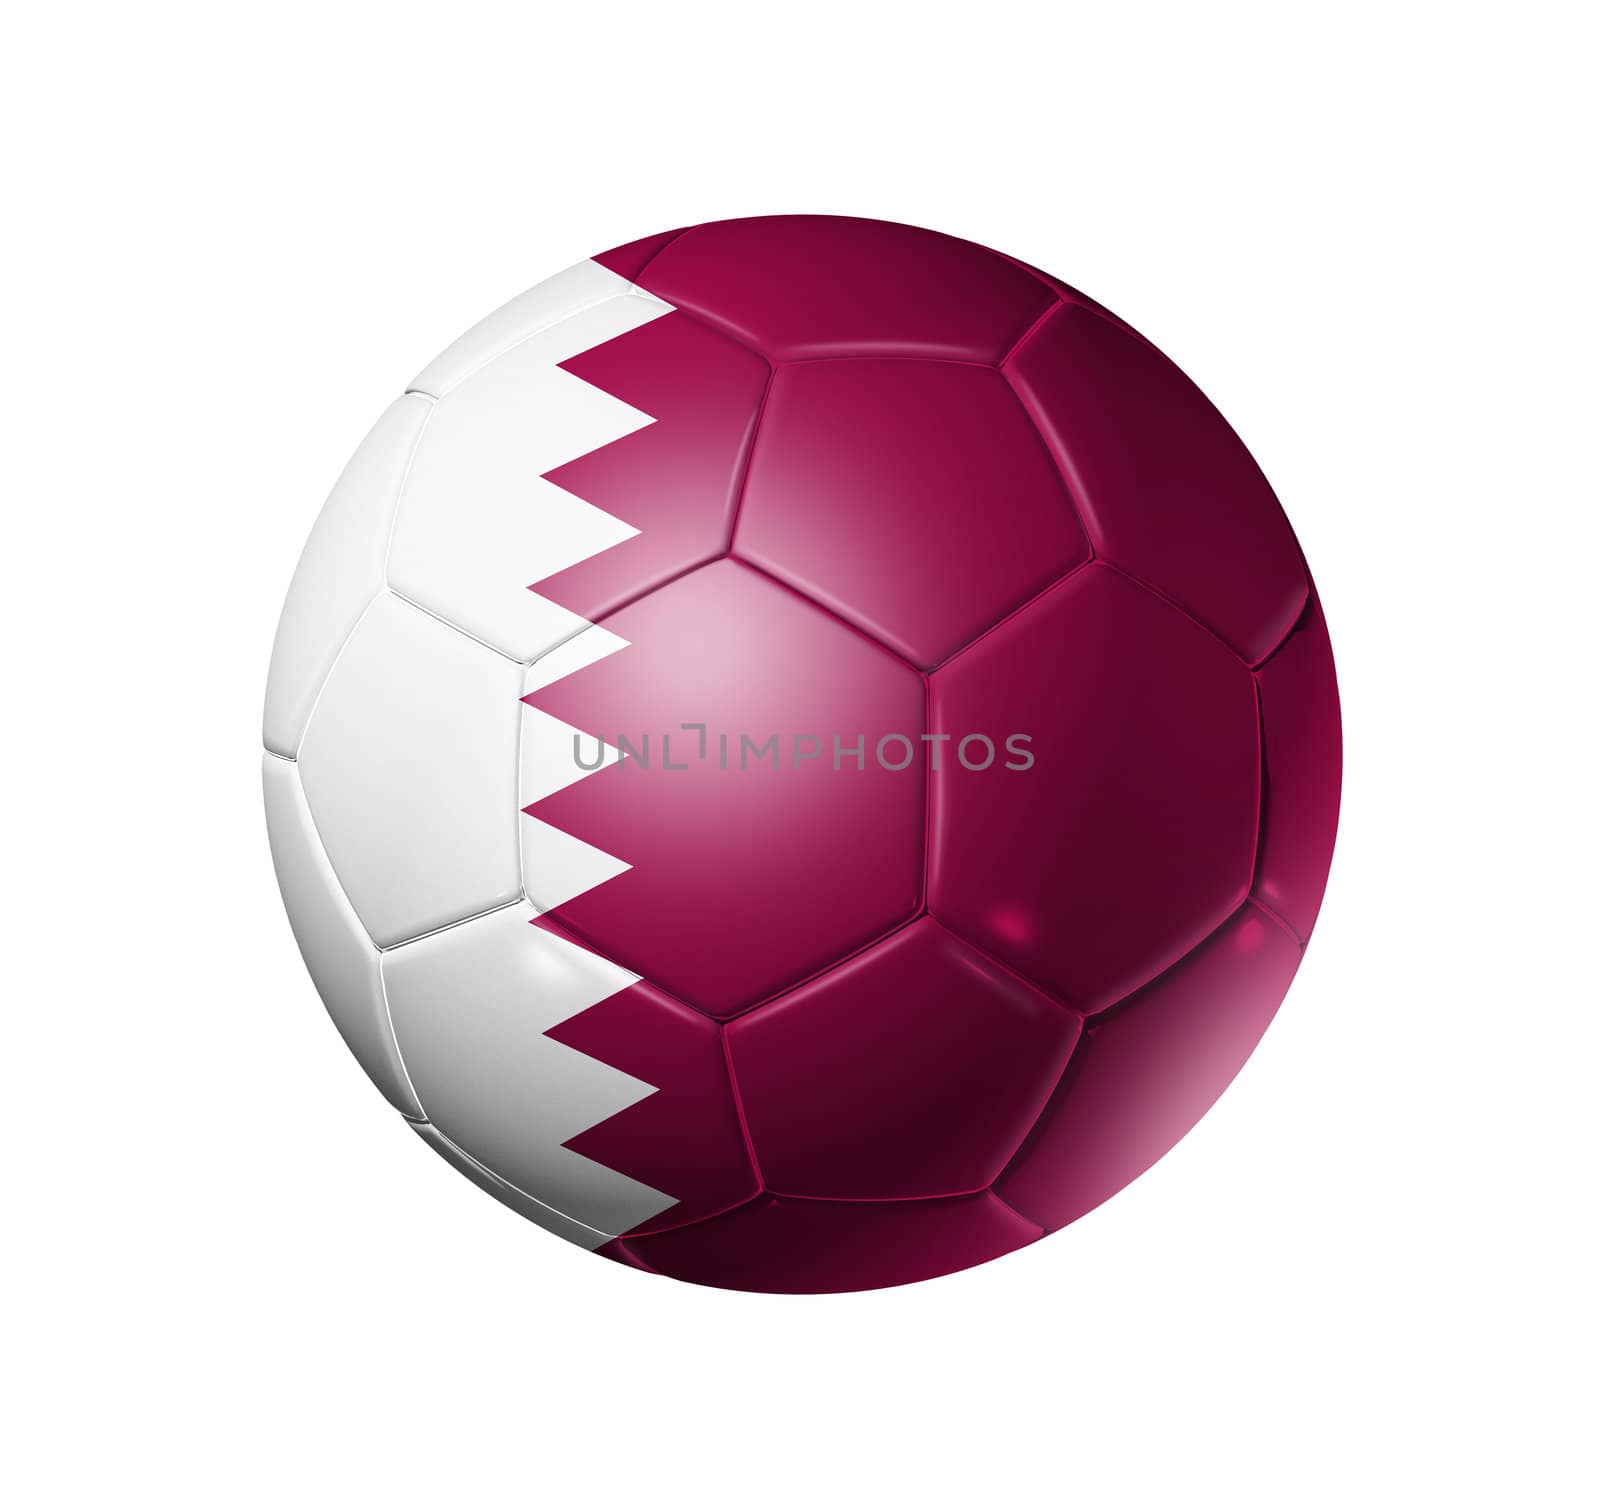 3D soccer ball with Qatar team flag. isolated on white with clipping path